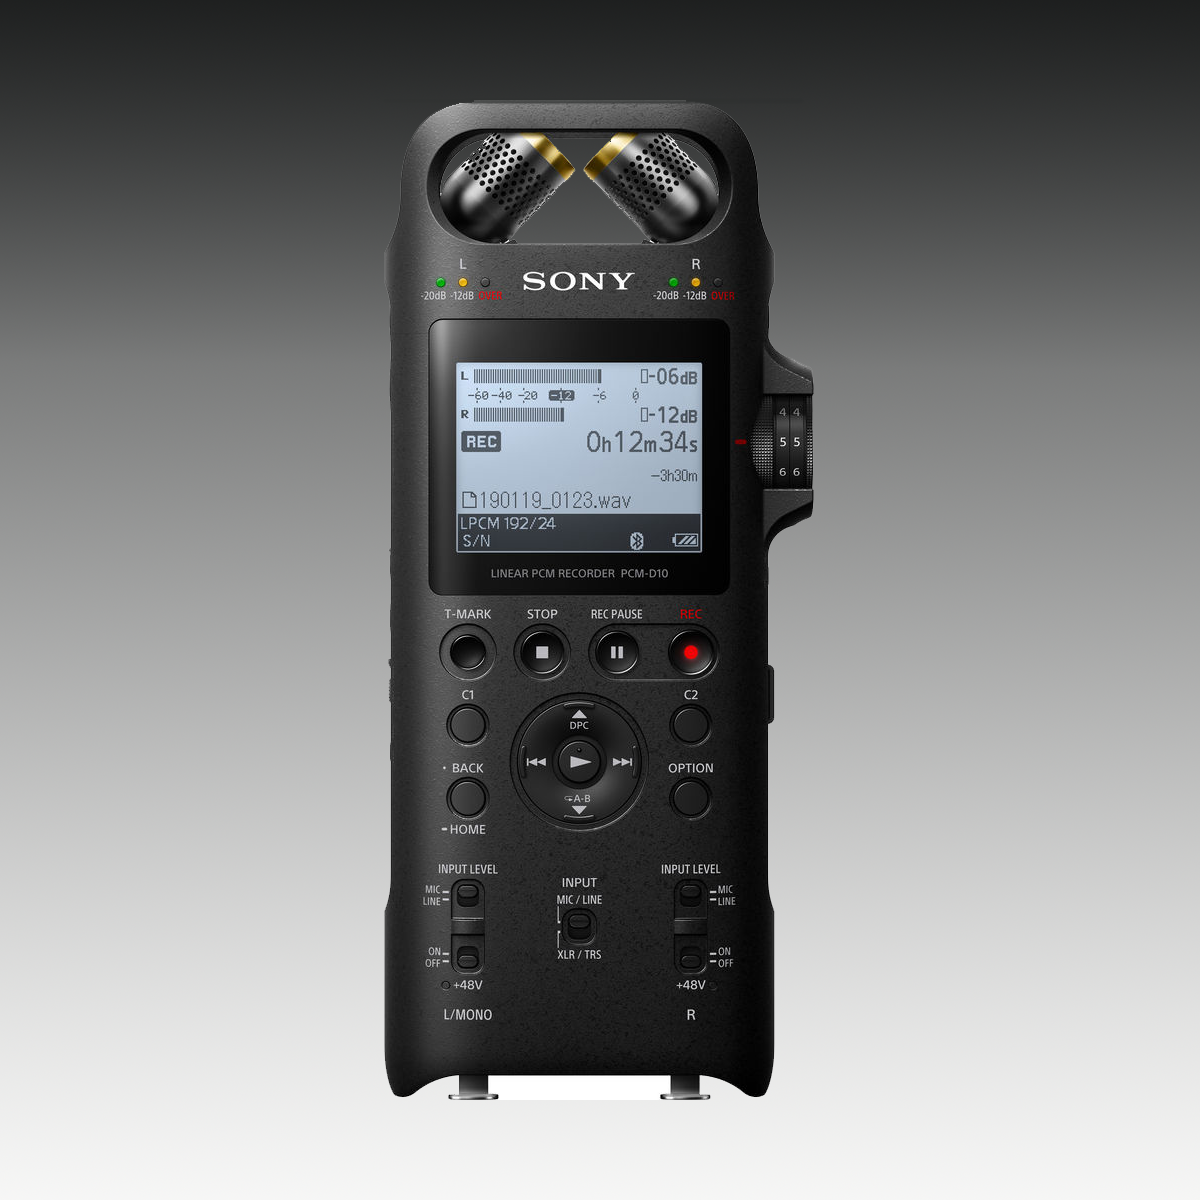 Sony PCM D10 a well-built audio recorder